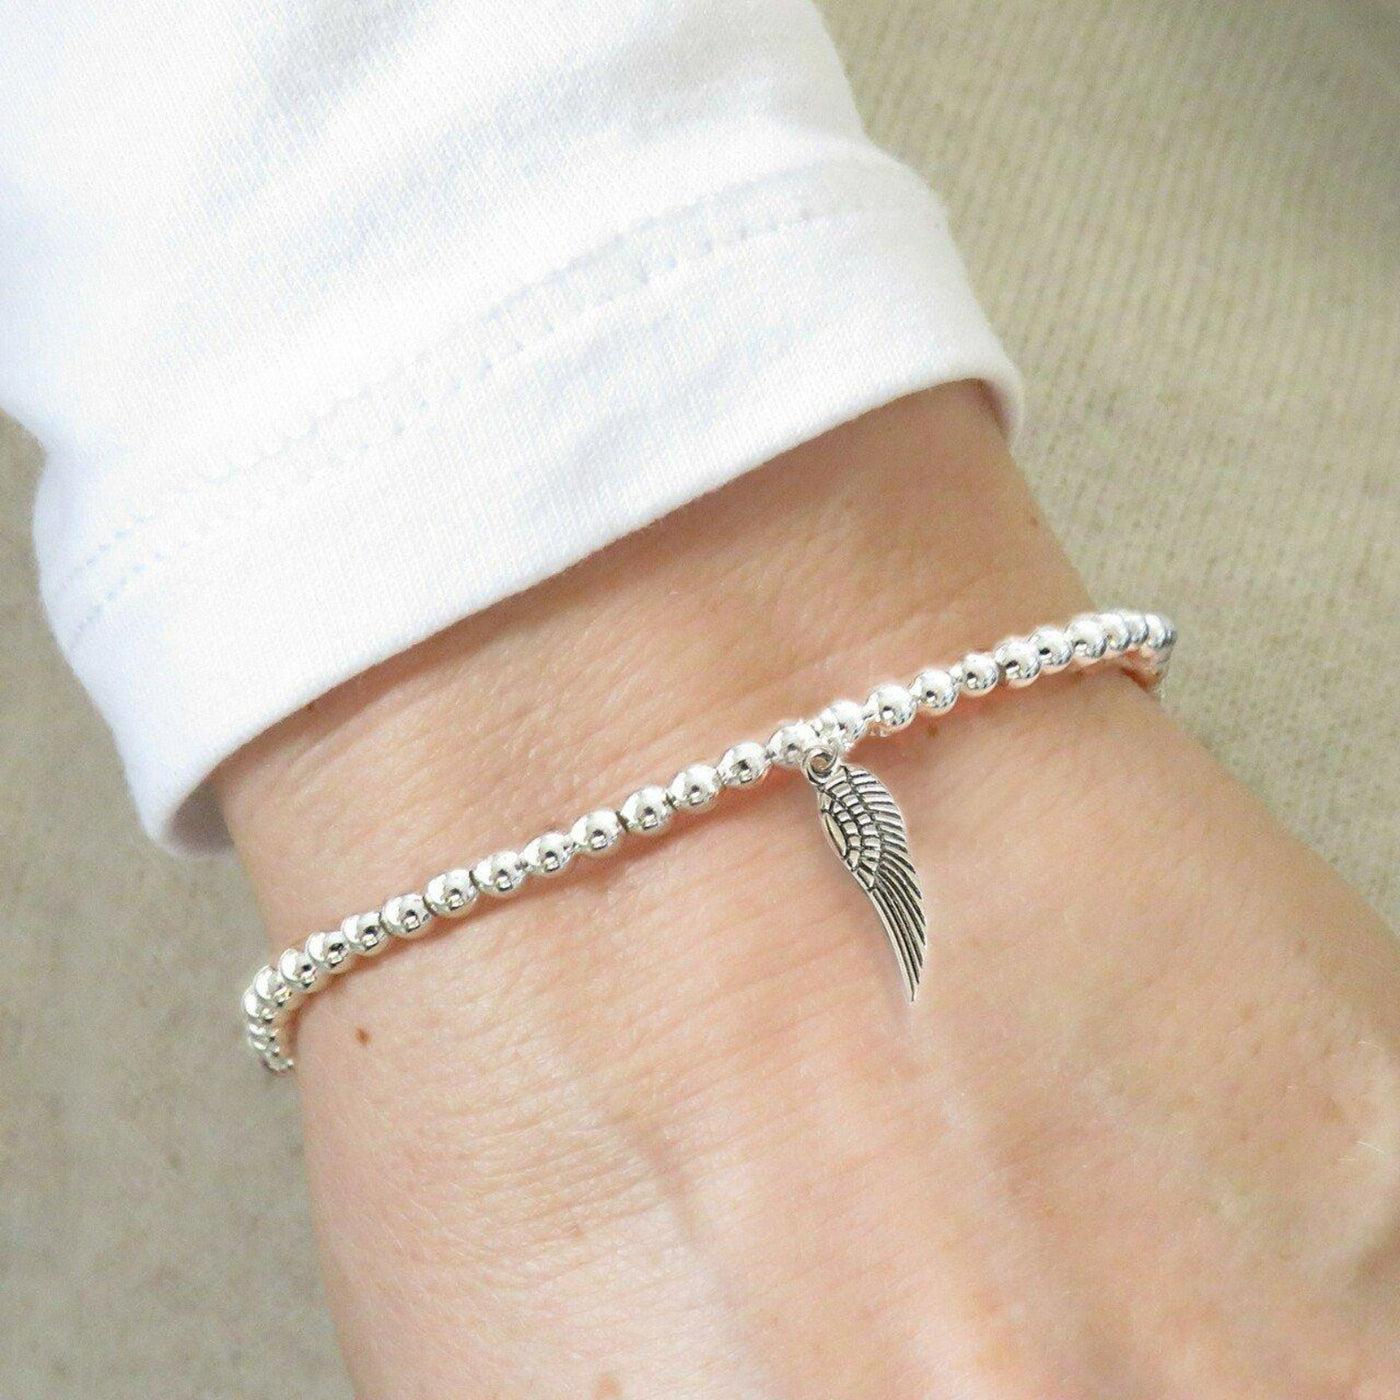 Angel Wing LGBT Transgender Silver Plated Bracelet On Rainbow 'Thank You' Message Card.